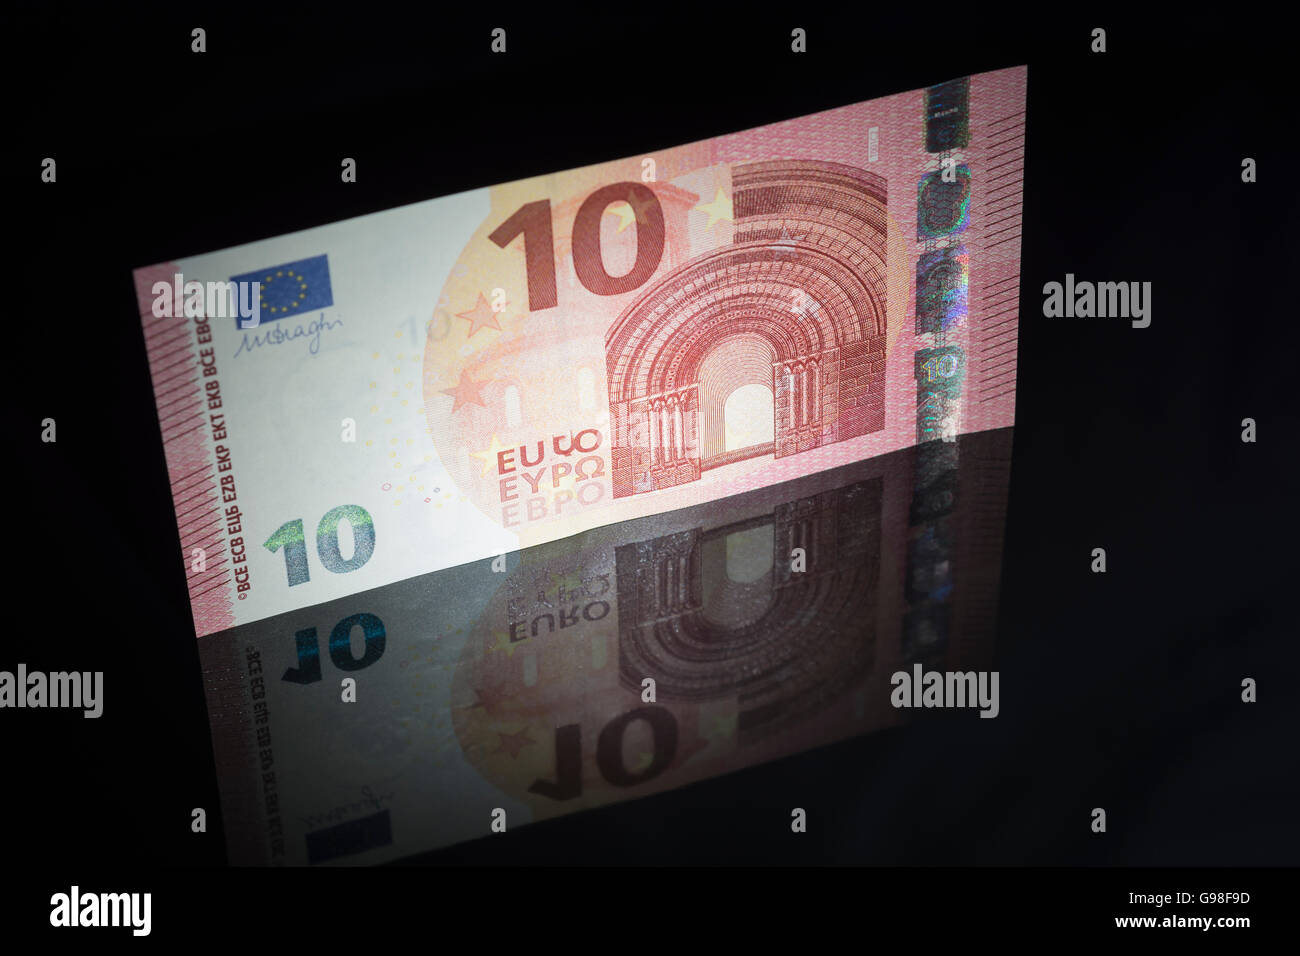 Concept of Euro zone, single market represented by a 10 Euro banknote. Stock Photo